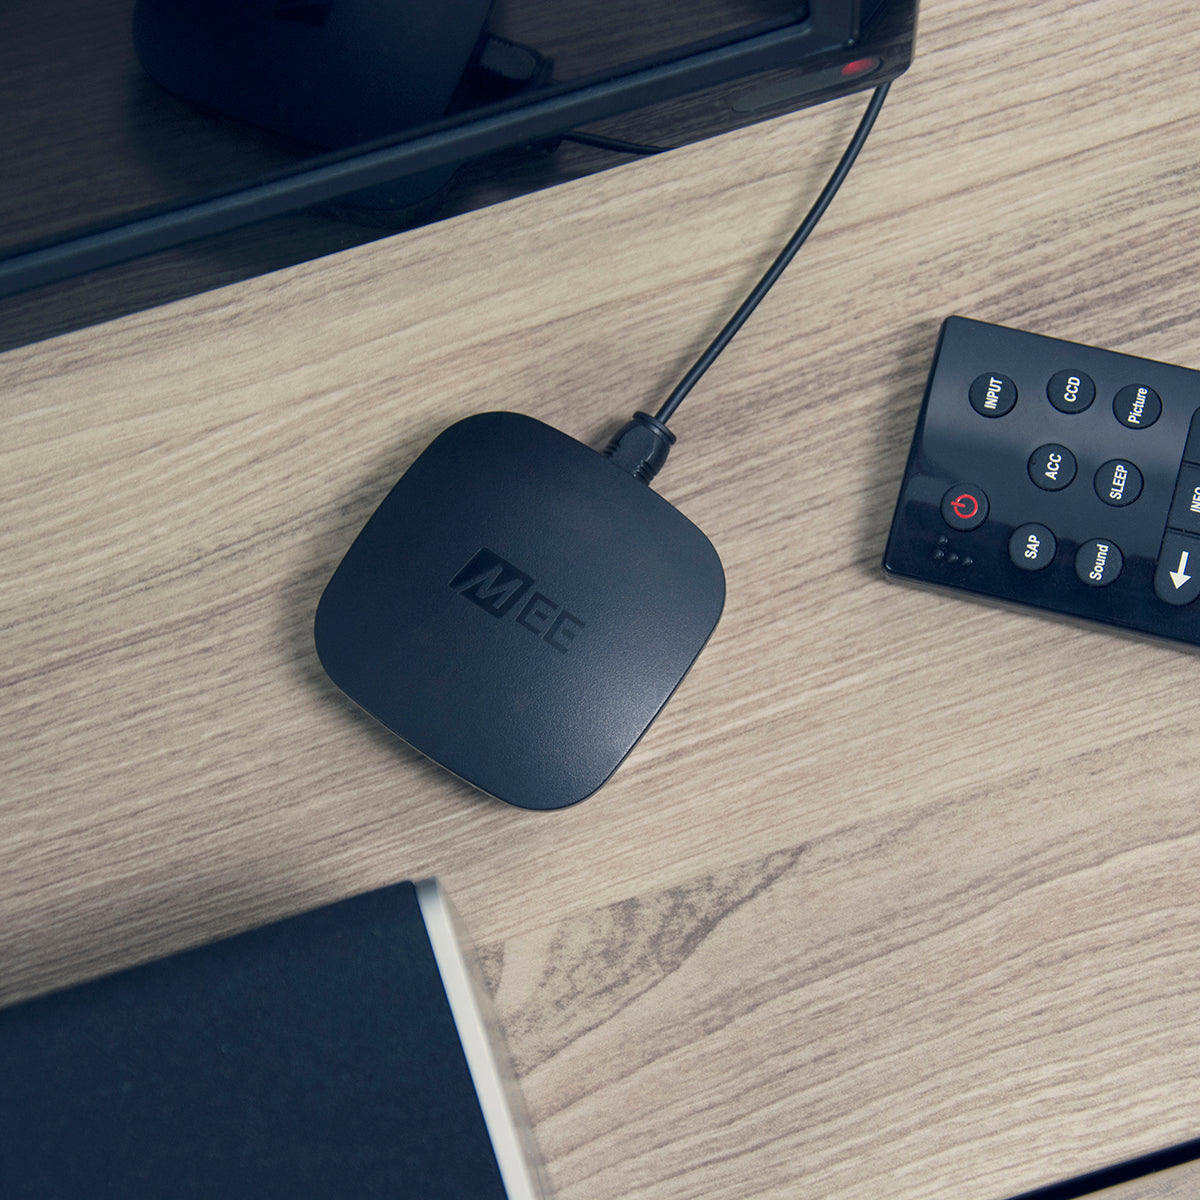 A black streaming media player labeled "mee" connected to a cable on a wooden desk, next to a remote control and a part of a black electronic device.